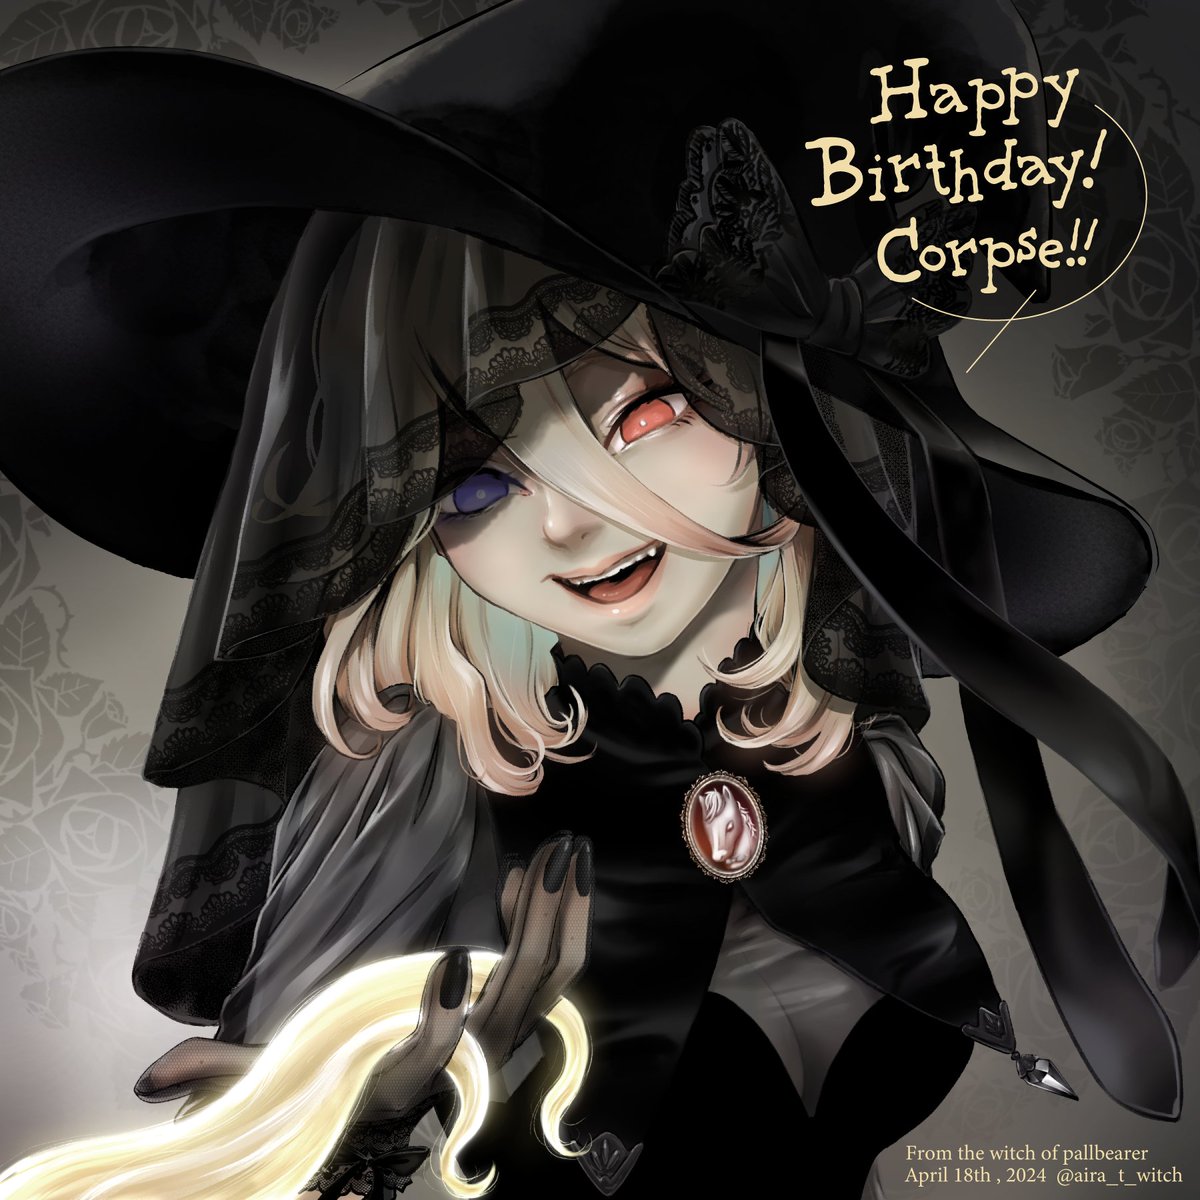 #almsforthedead
Happy birthday Corpse!
I want to touch your beautiful hair🤭

From the witch of pallbearer.
Thanks to @6HornTaurus for the shout out!